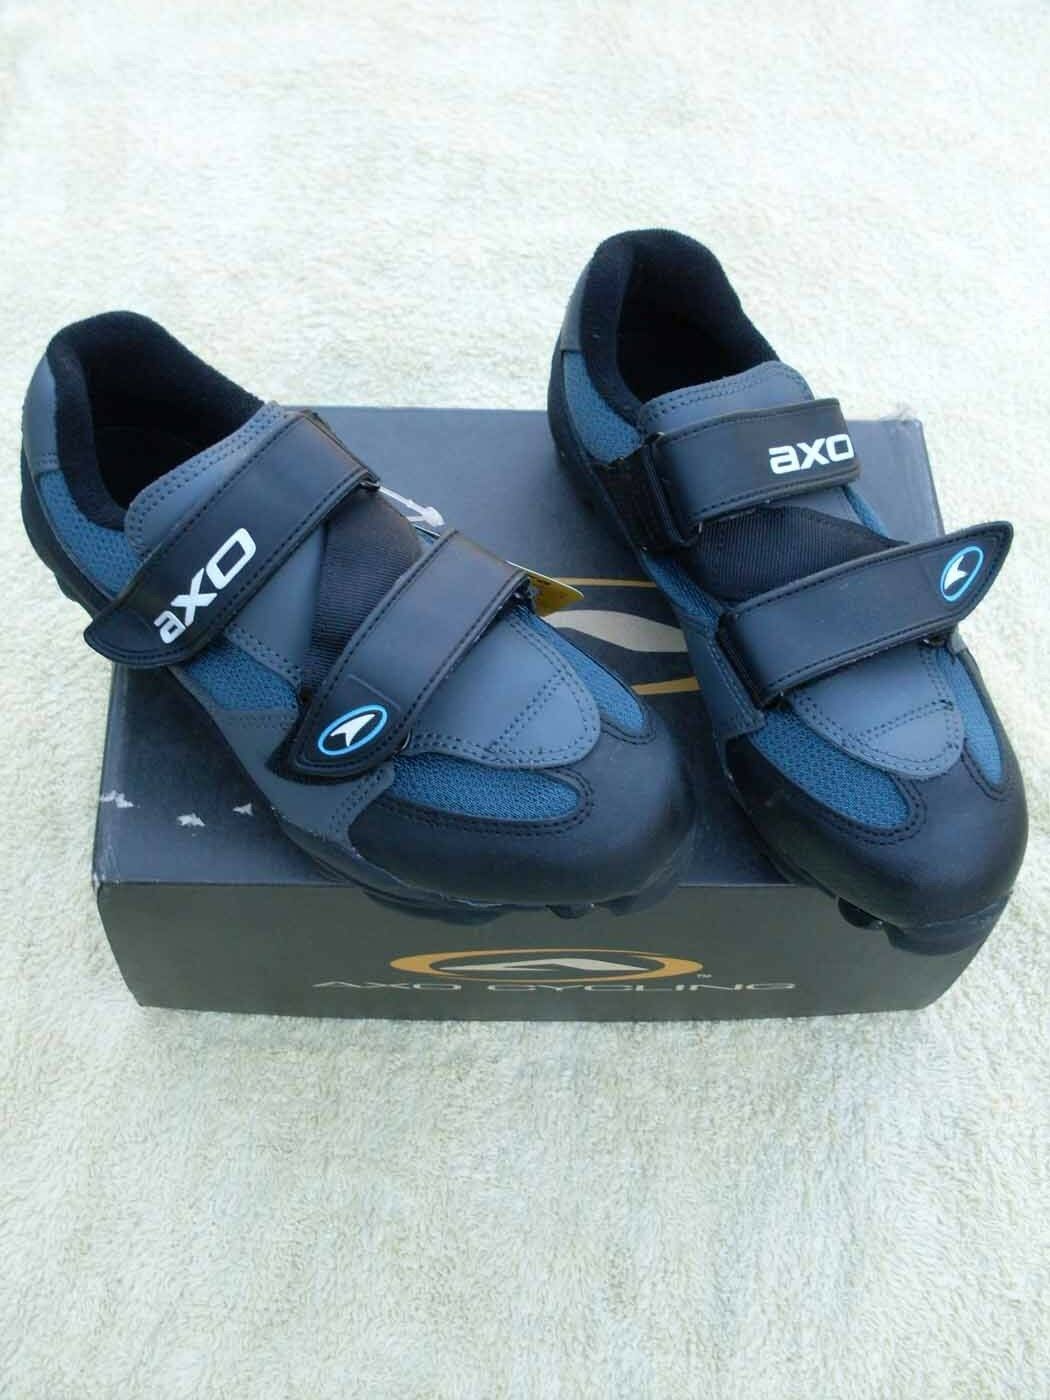 New Cycling Shoes Axo Summit Womens Terra Size 24 Cm